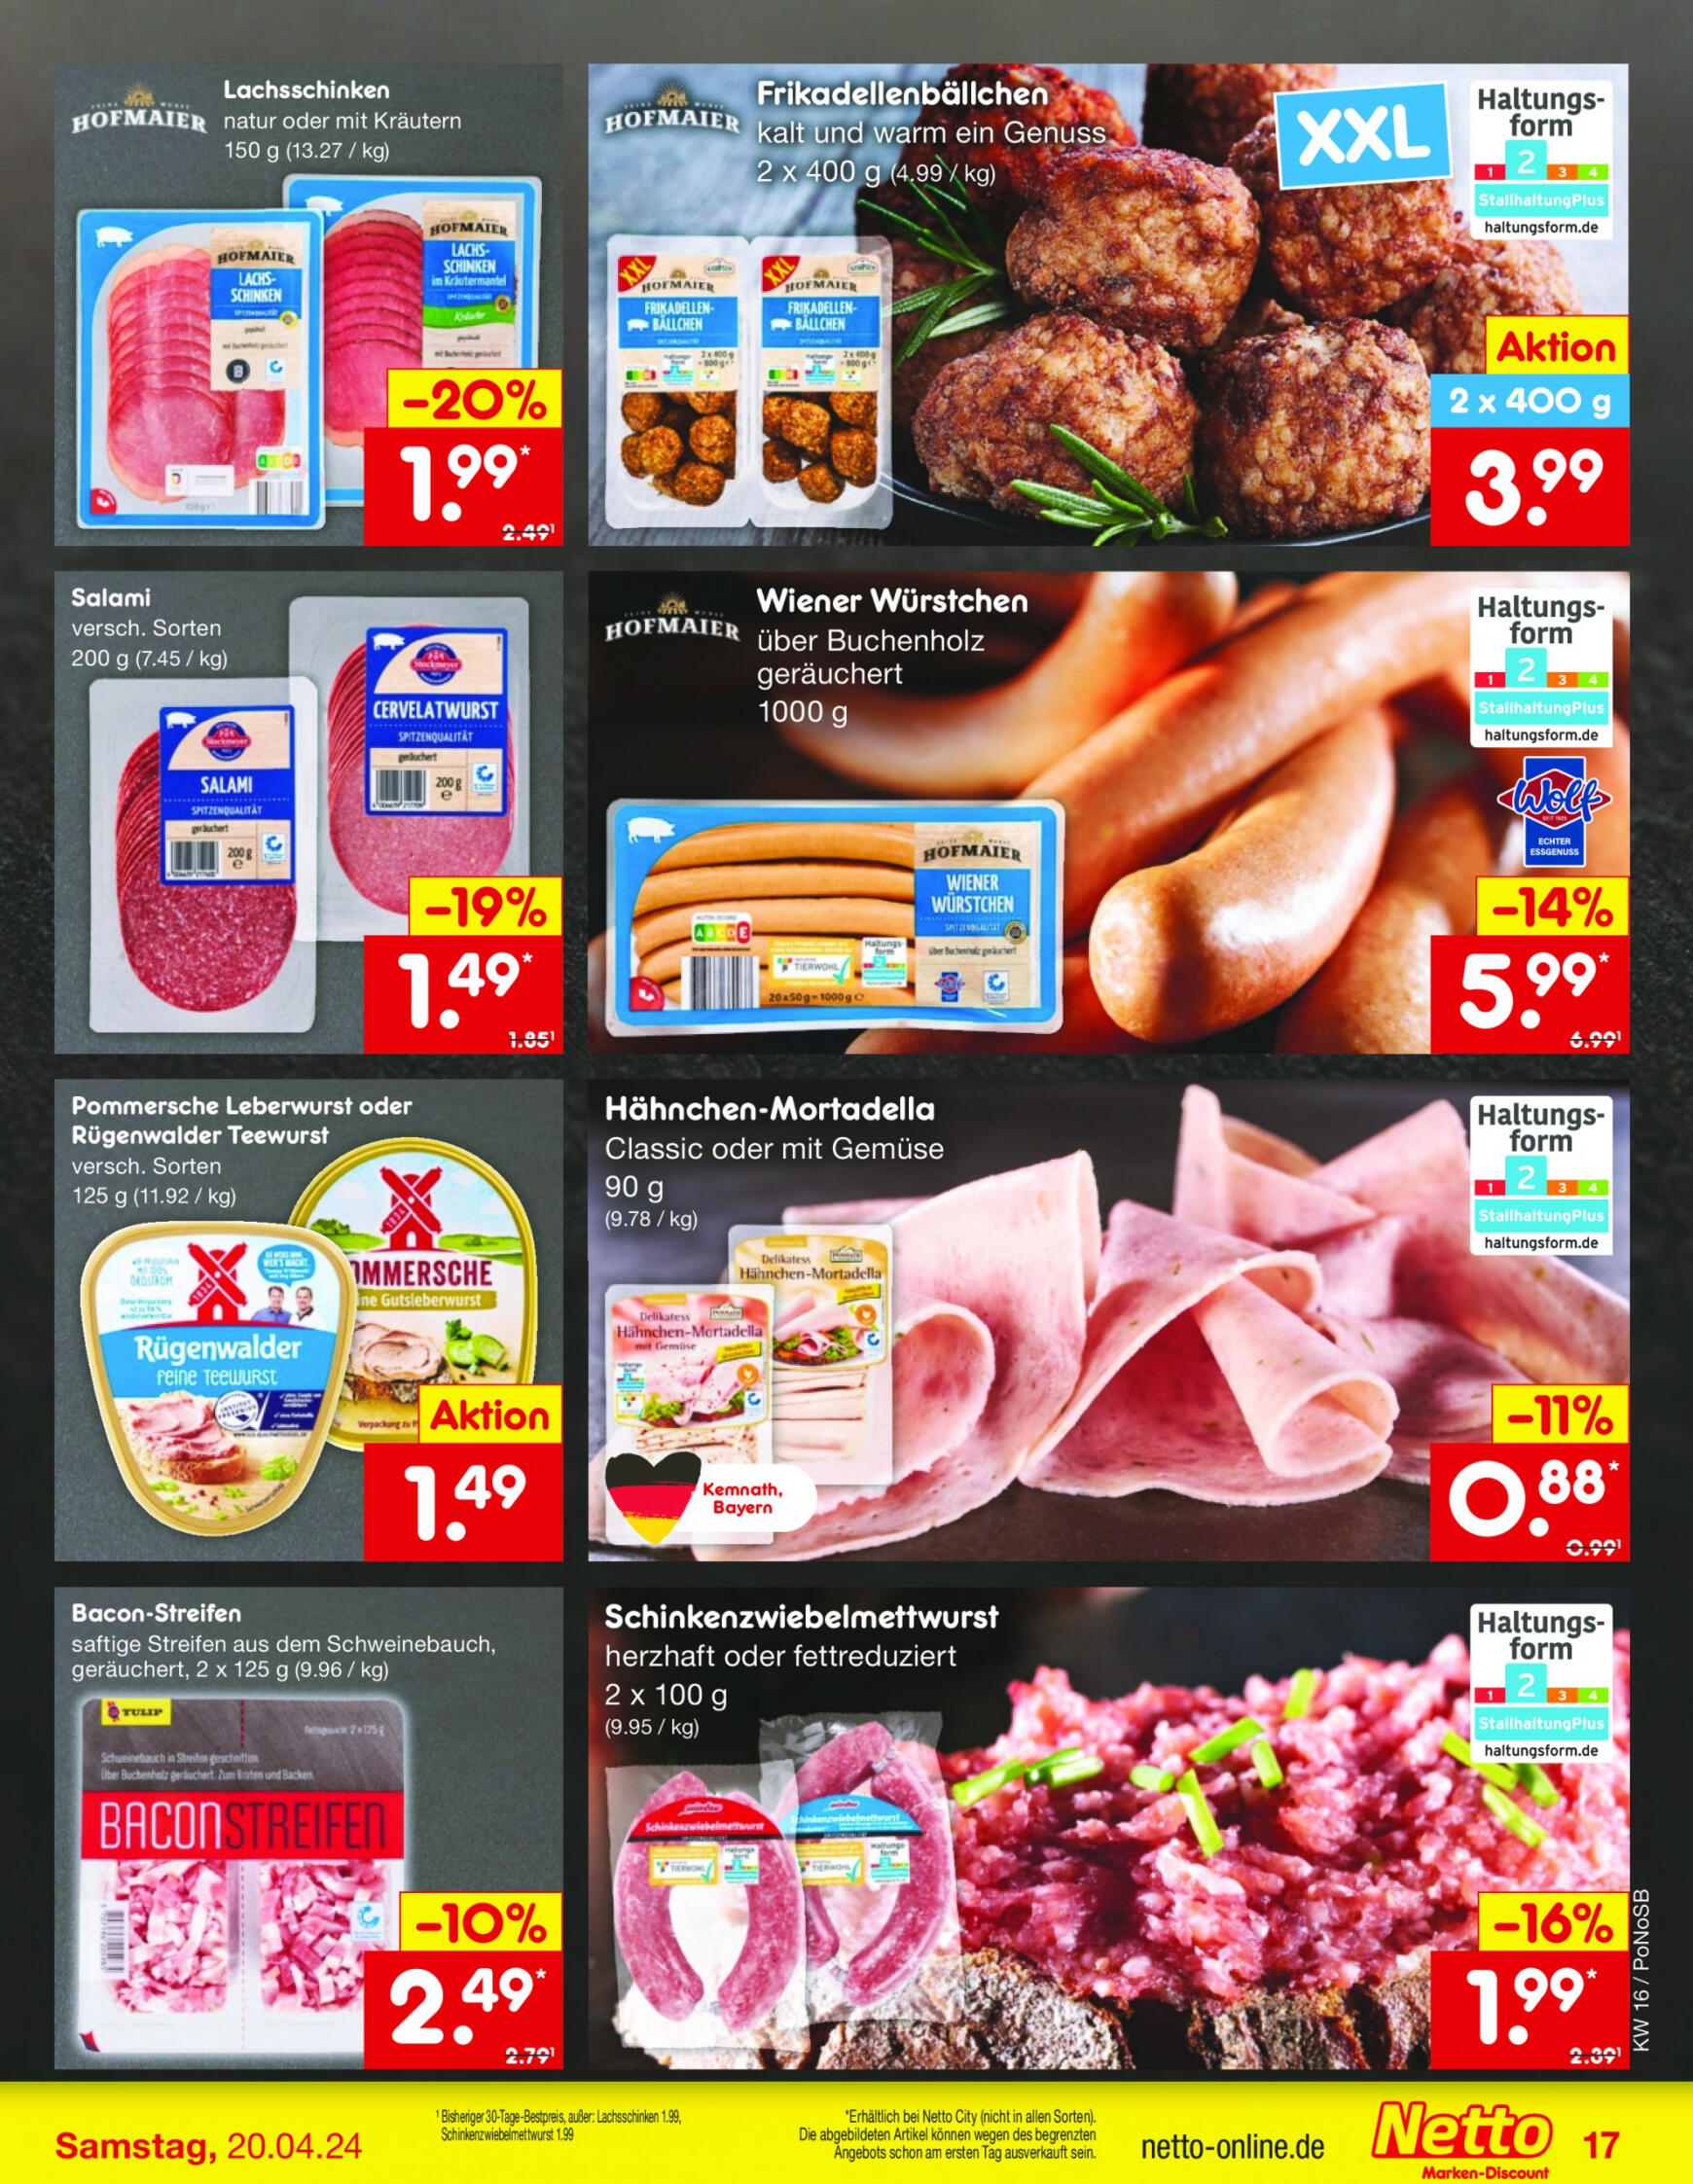 netto - Flyer Netto aktuell 15.04. - 20.04. - page: 19